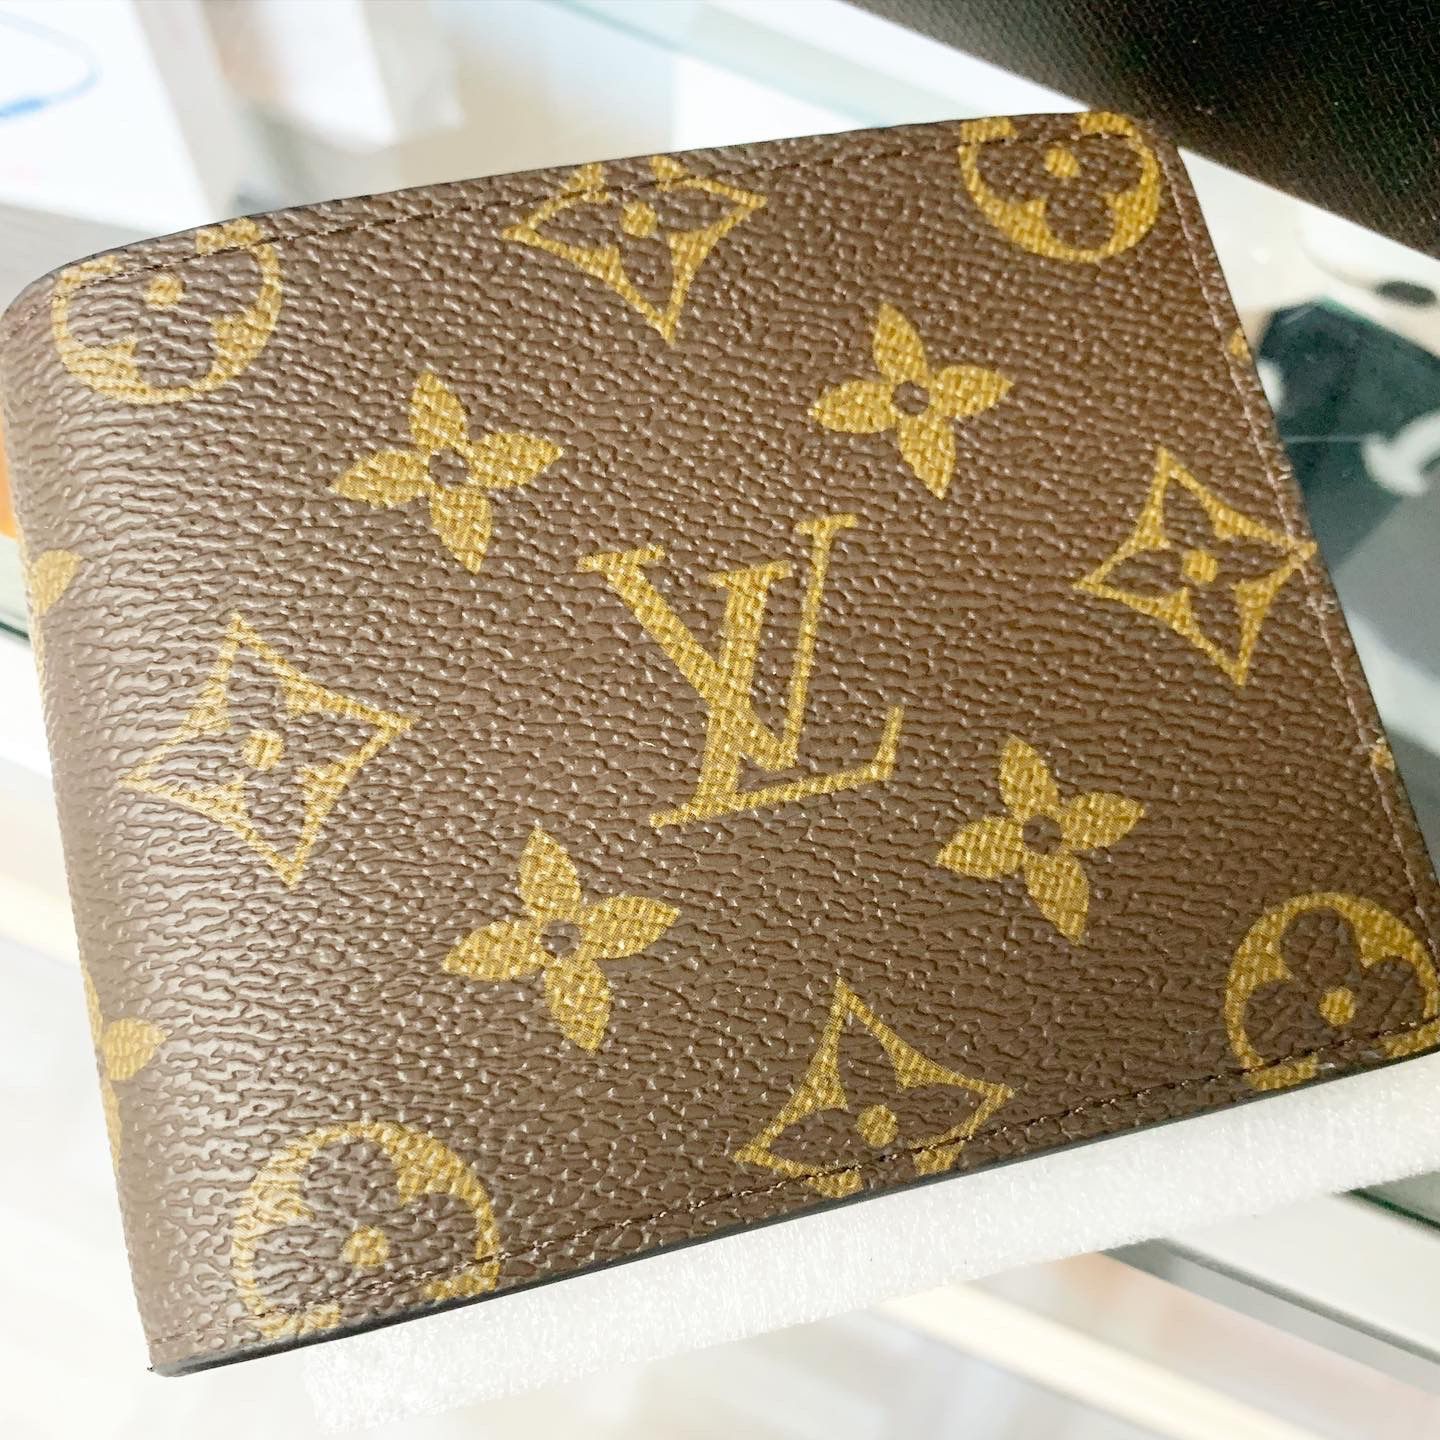 Louis Vuitton wallet Brand new sealed in box and in Louis Vuitton bag.